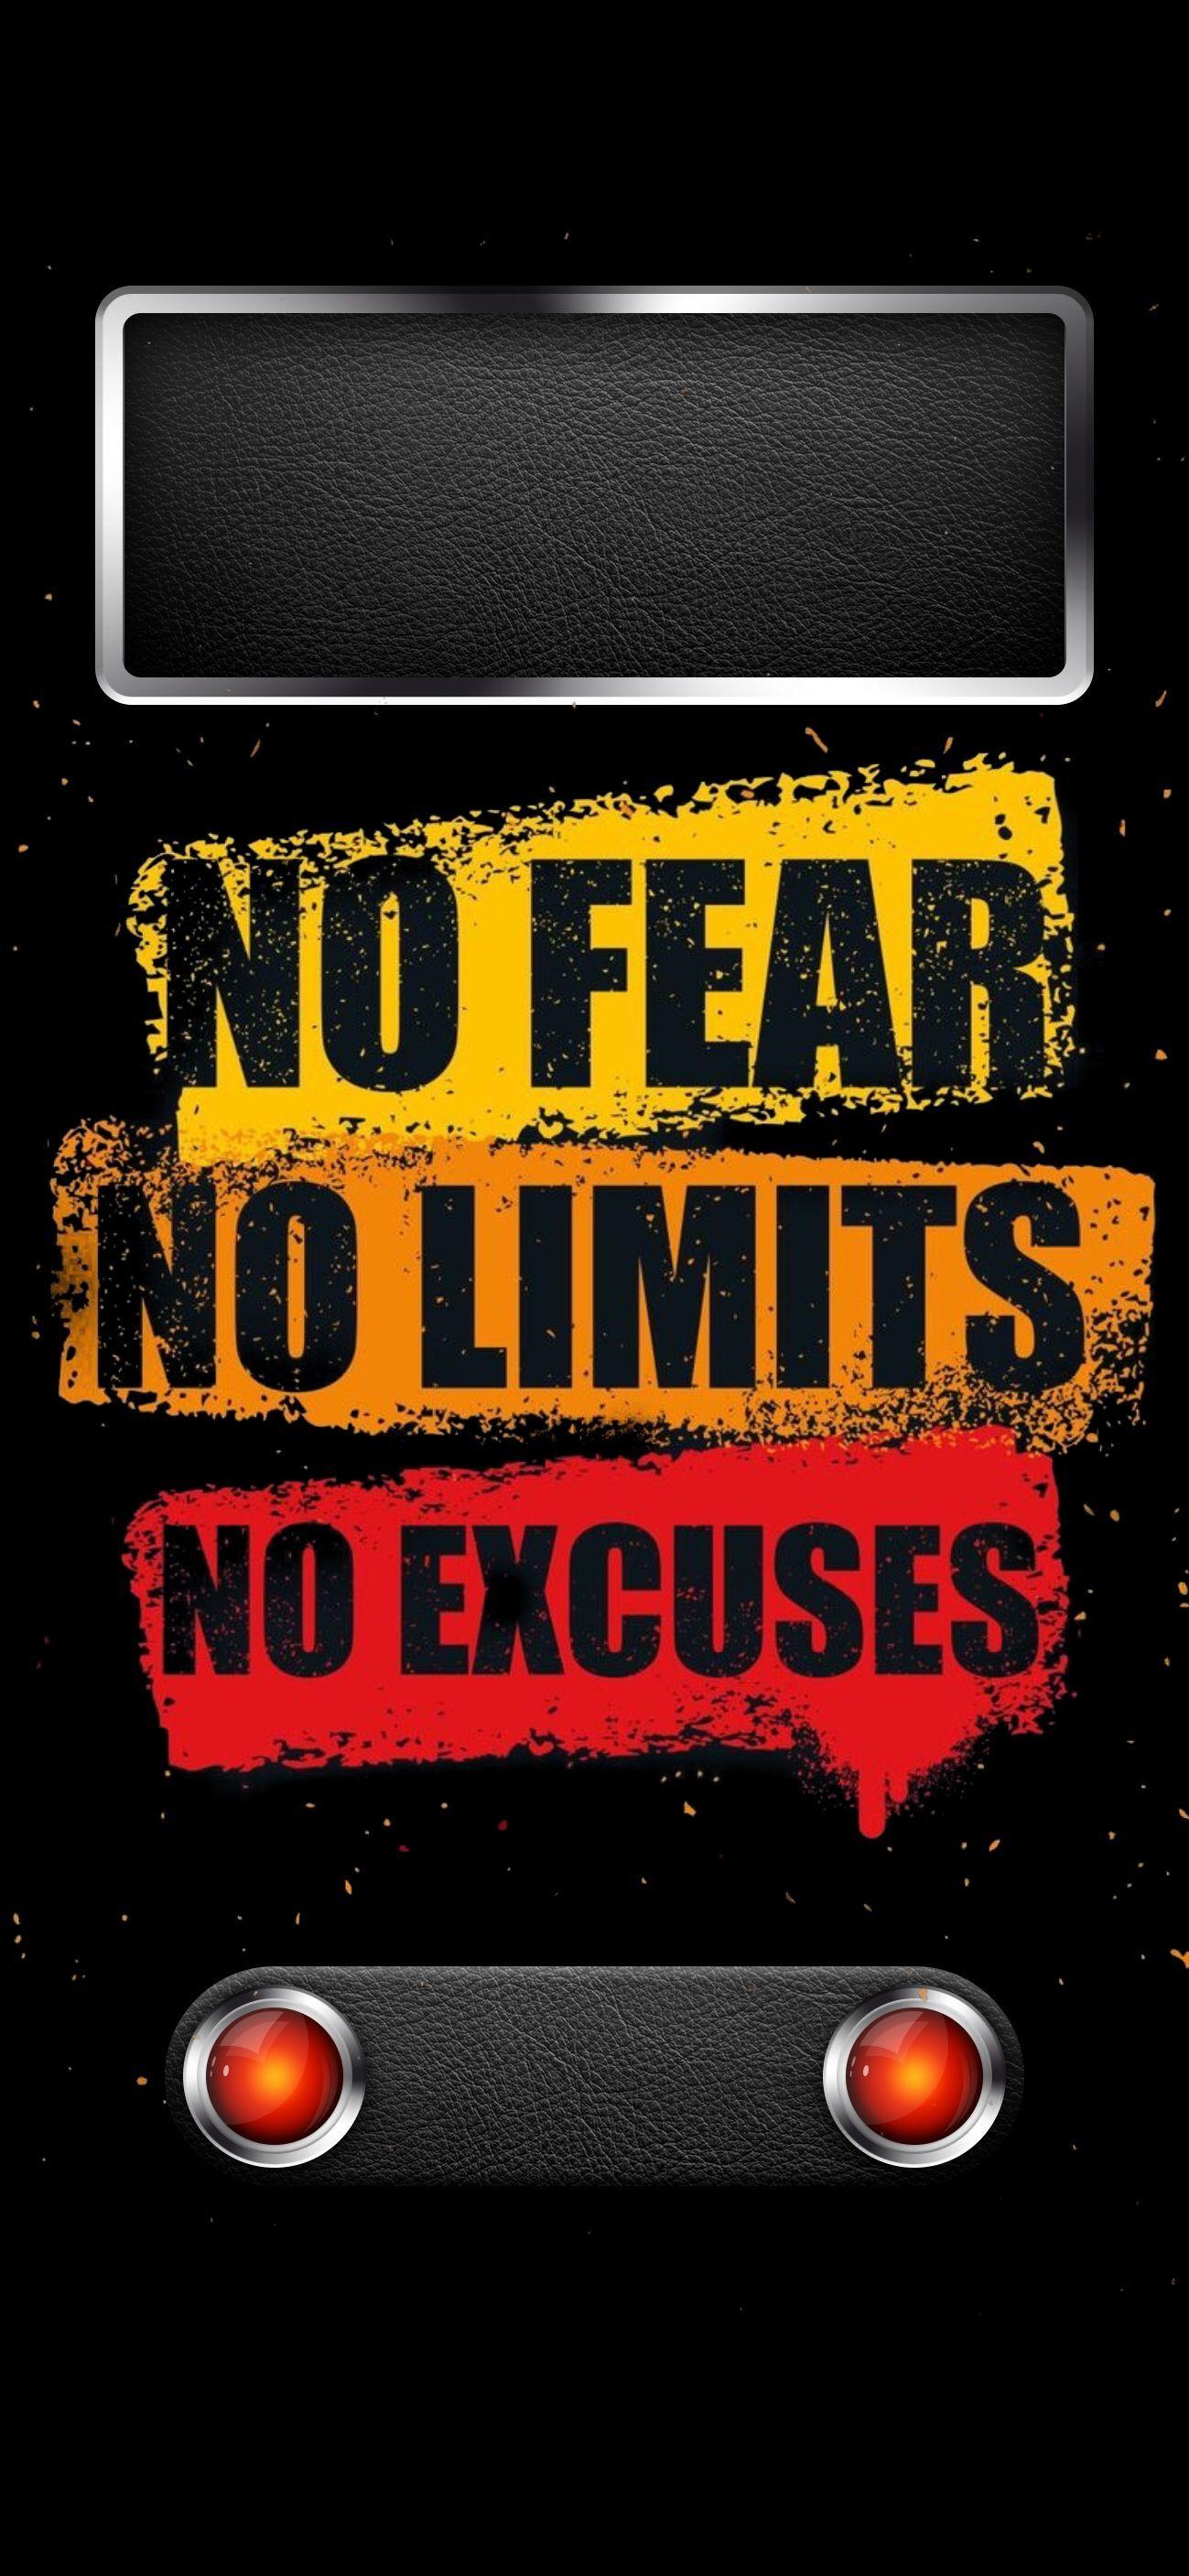 No Excuses Just Results Inspiring Sport Workout Typography Motivation  Quote Banner on Textured Background Stock Vector  Illustration of  concept frame 172905673